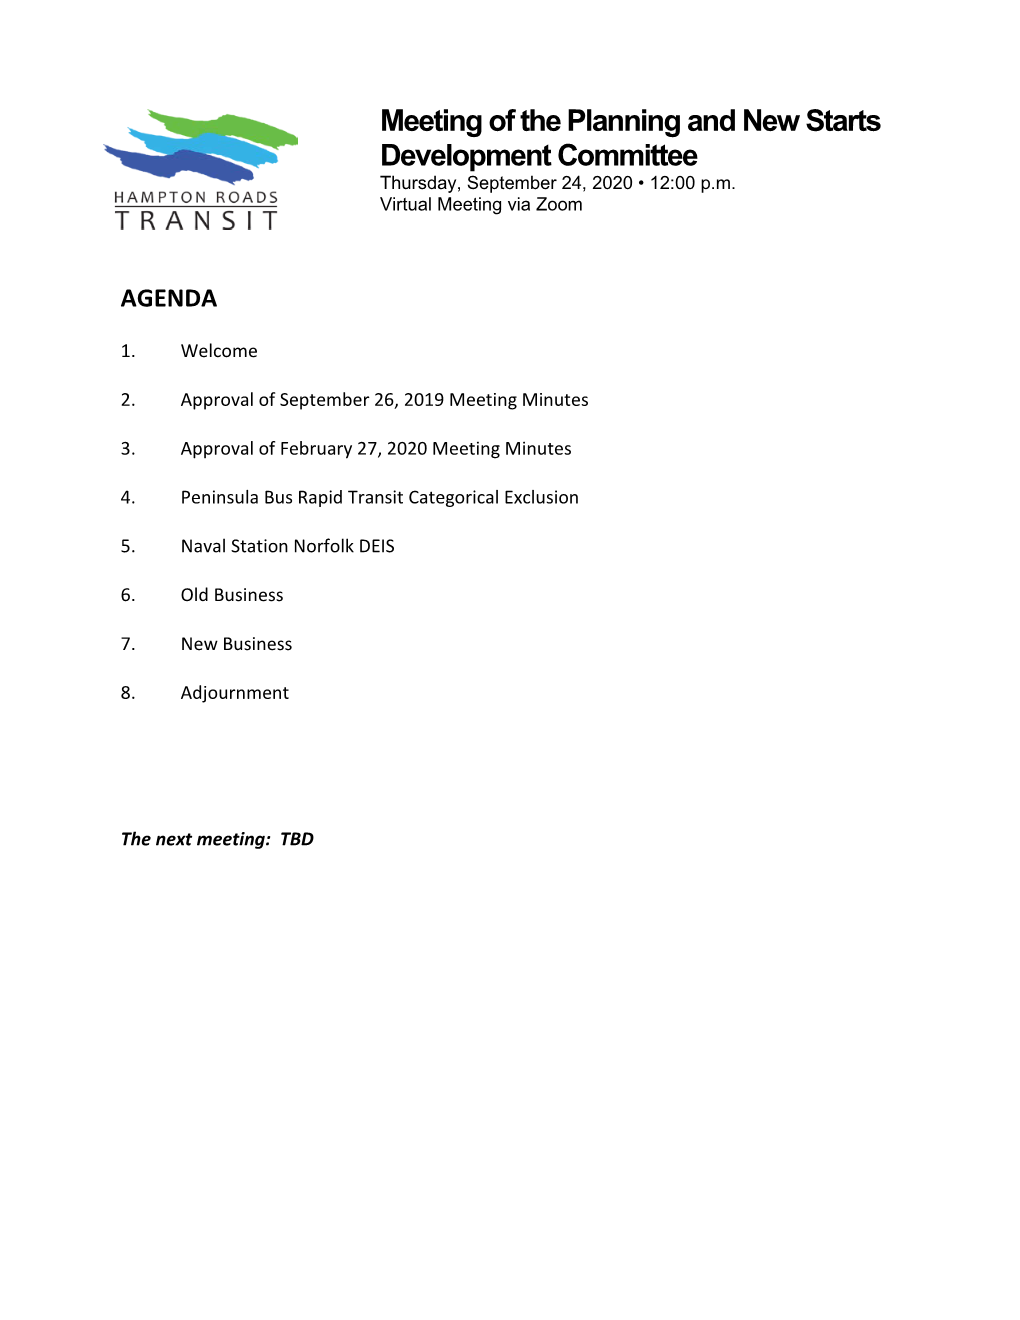 Meeting of the Planning and New Starts Development Committee Thursday, September 24, 2020 • 12:00 P.M